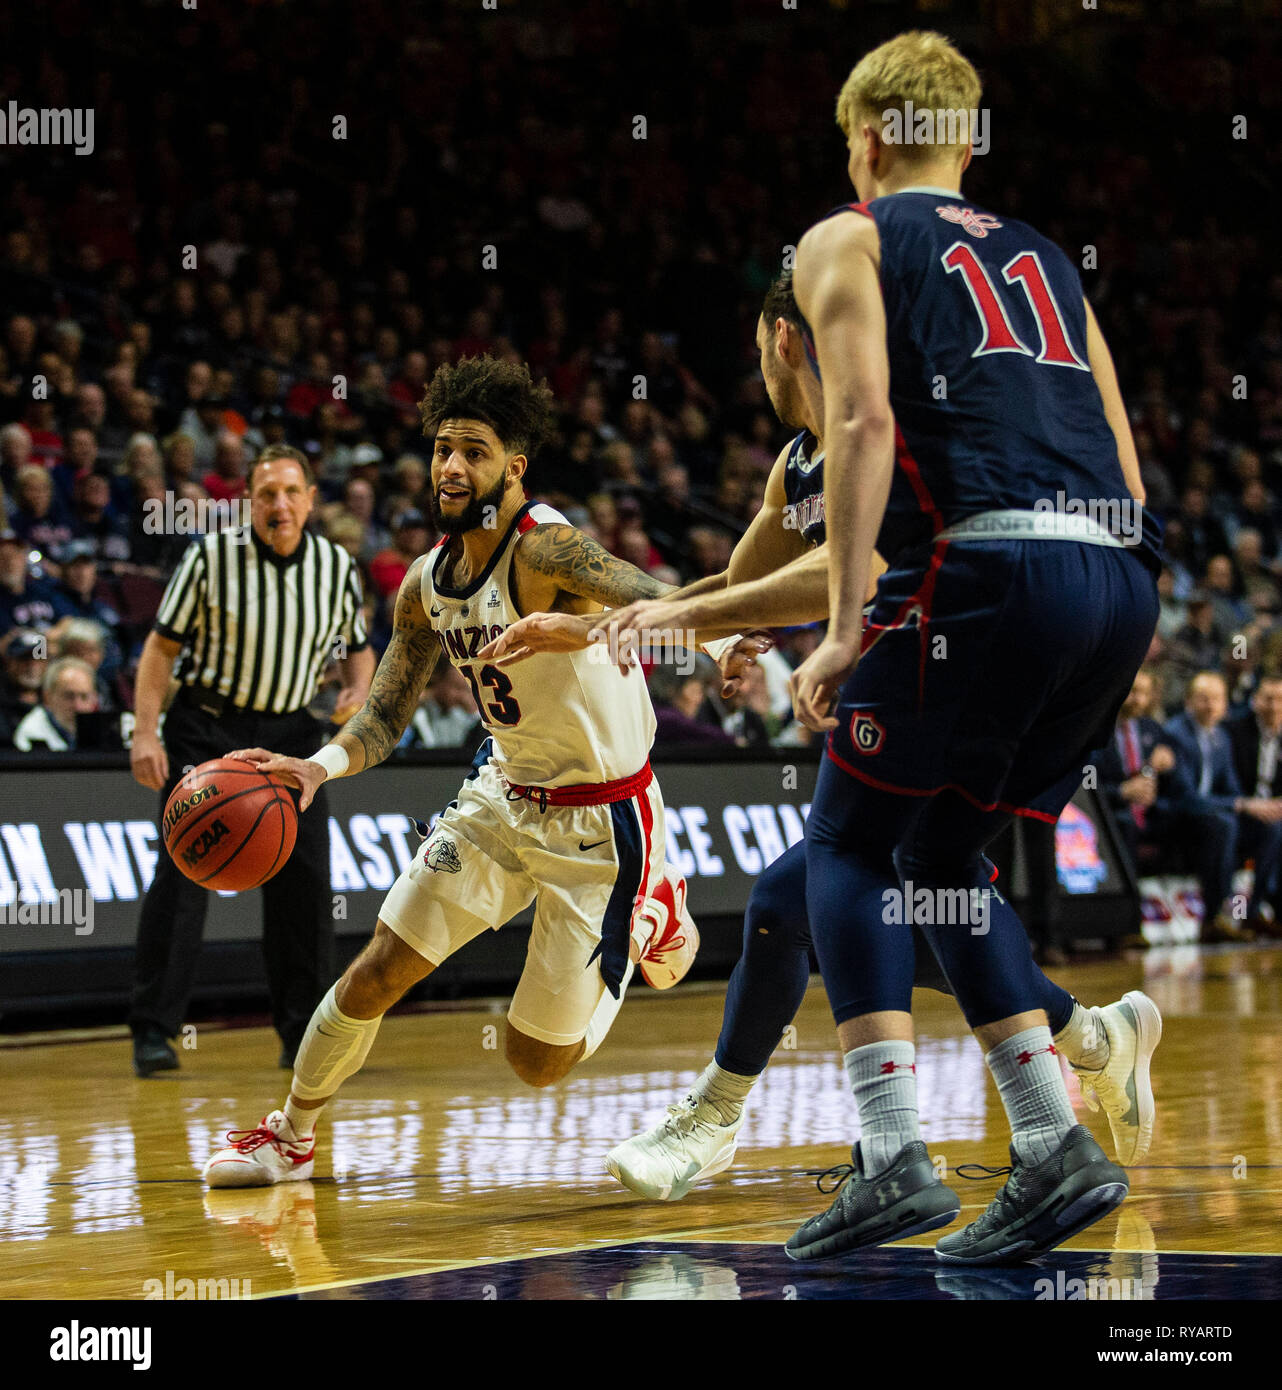 Mar 12 2019 Las Vegas, NV, U.S.A.Gonzaga guard Josh Perkins (13) drives to the basket during the NCAA West Coast Conference Men's Basketball Tournament championship between the Gonzaga Bulldogs and the Saint Mary's Gaels 47-60 lost at Orleans Arena Las Vegas, NV. Thurman James/CSM Stock Photo